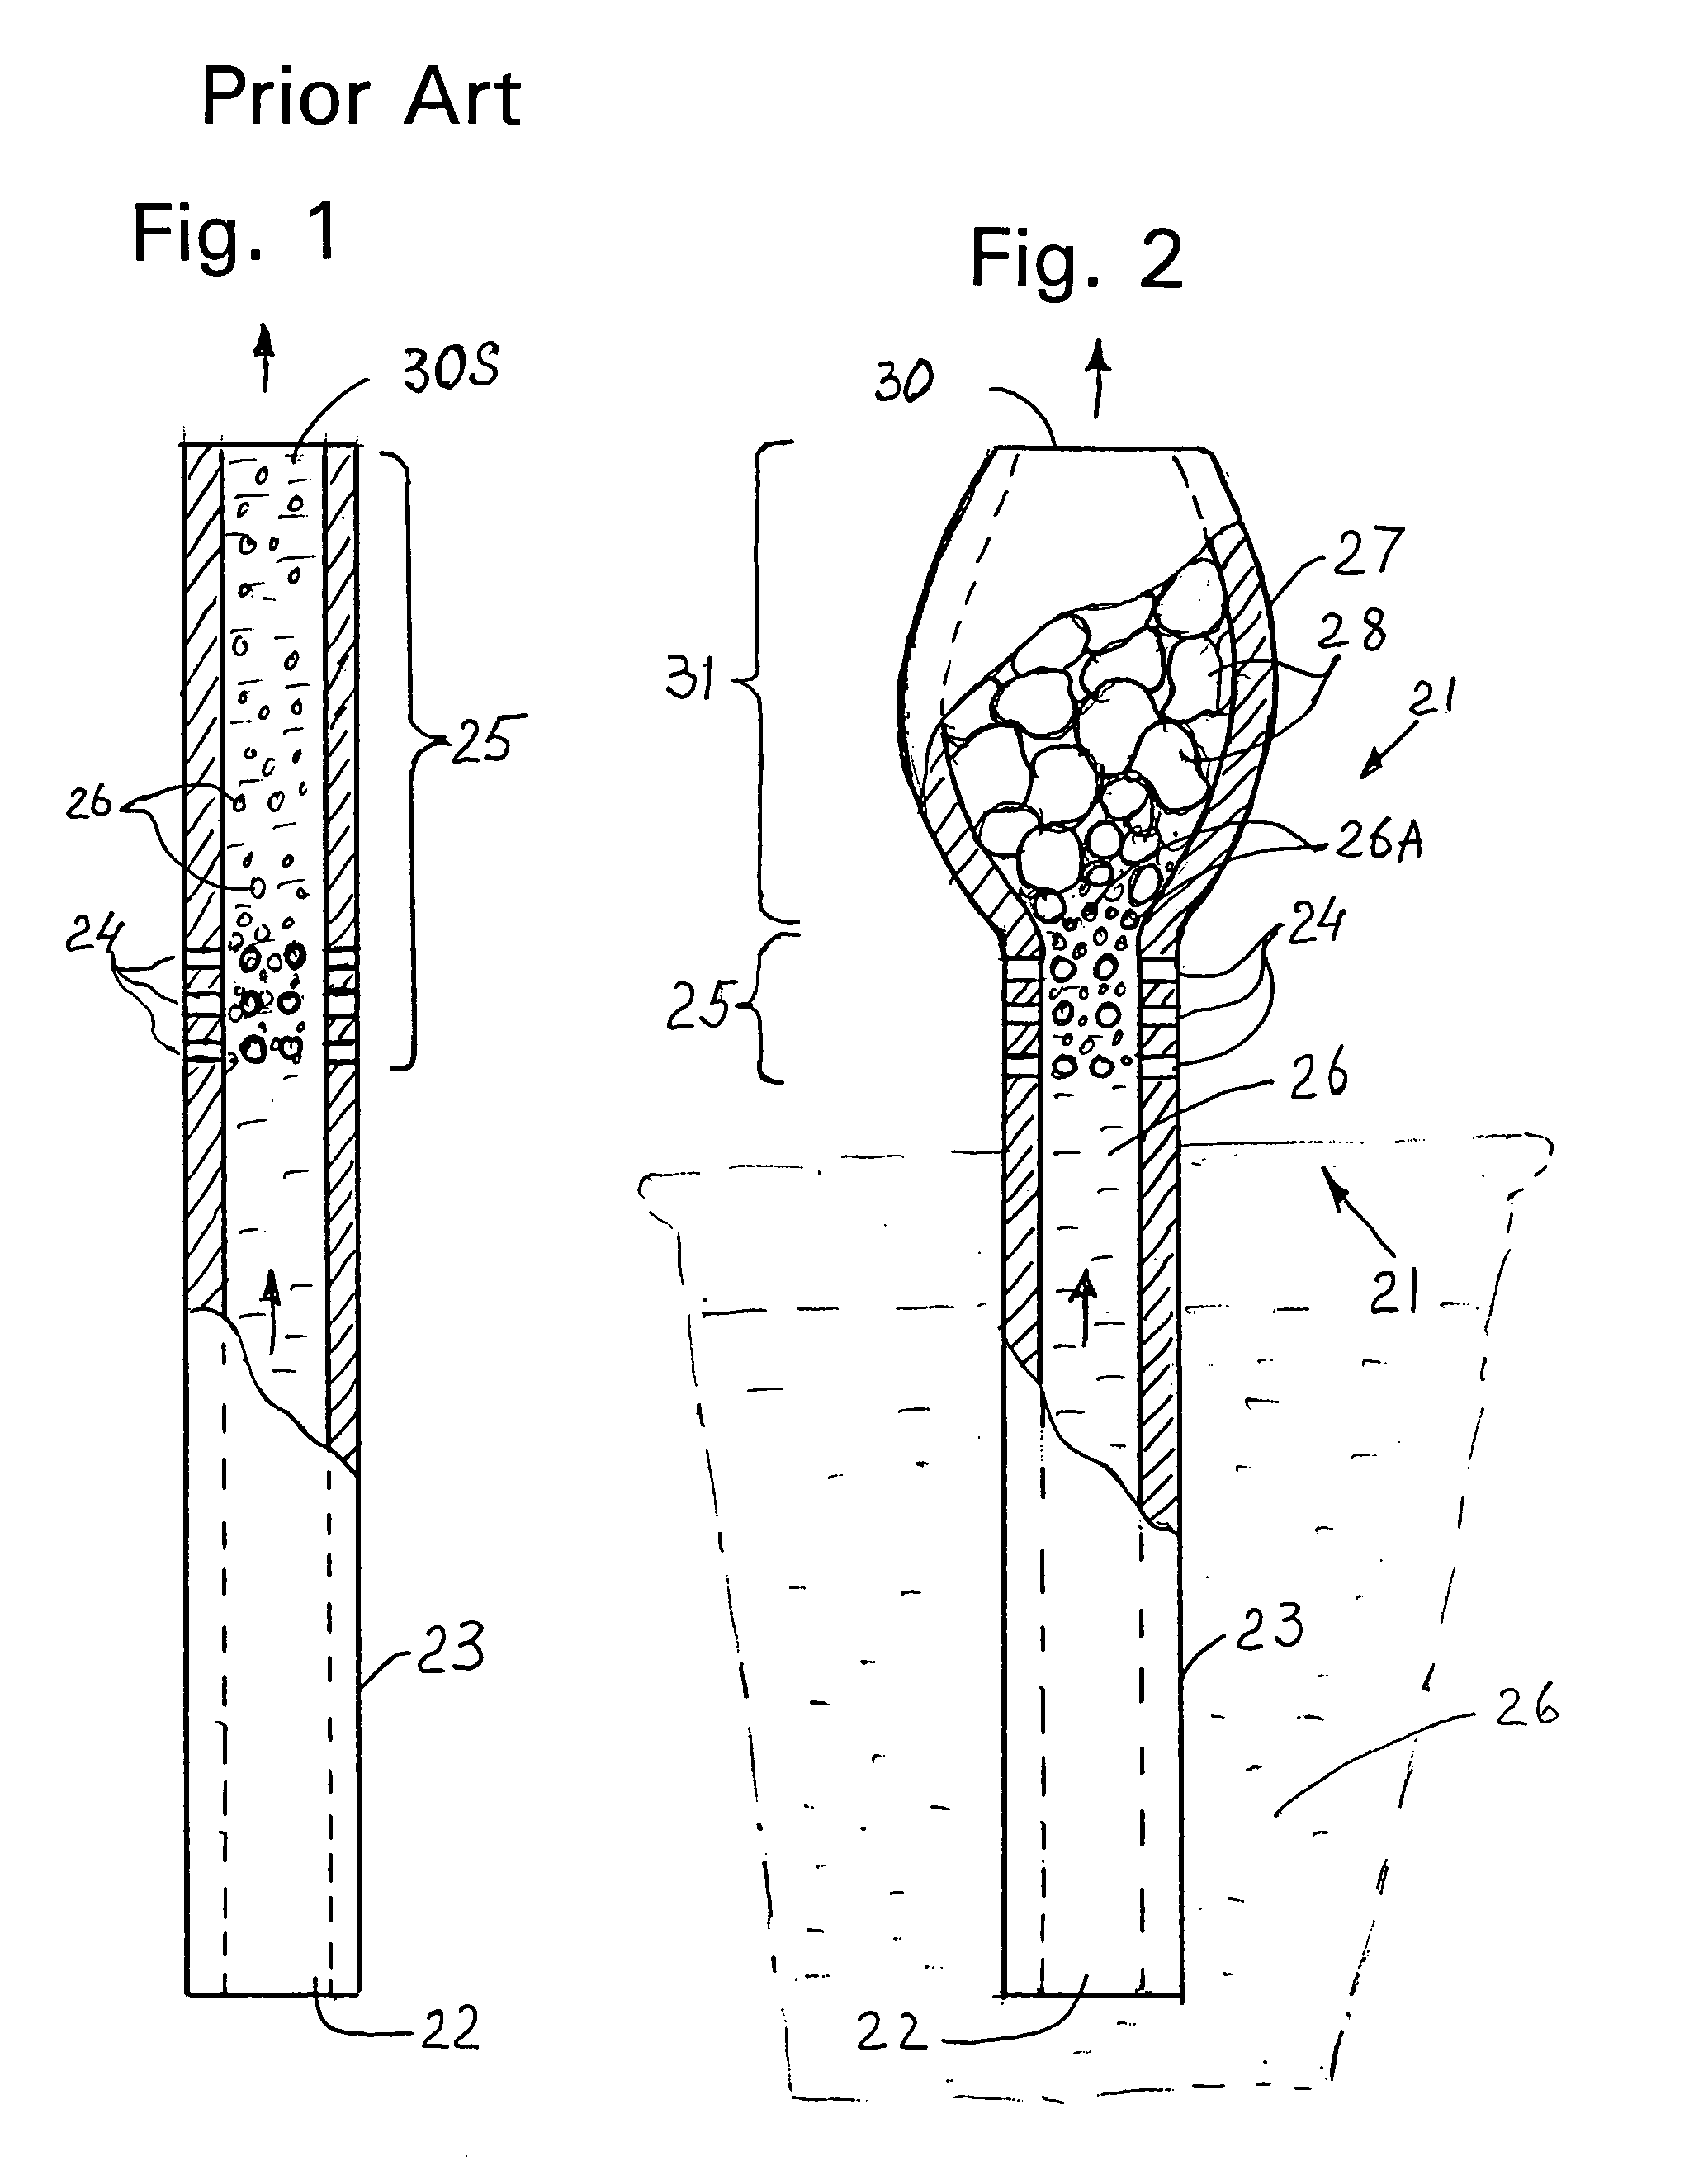 Drinking straw for heated liquids, method of cooling and combination with drinking vessels